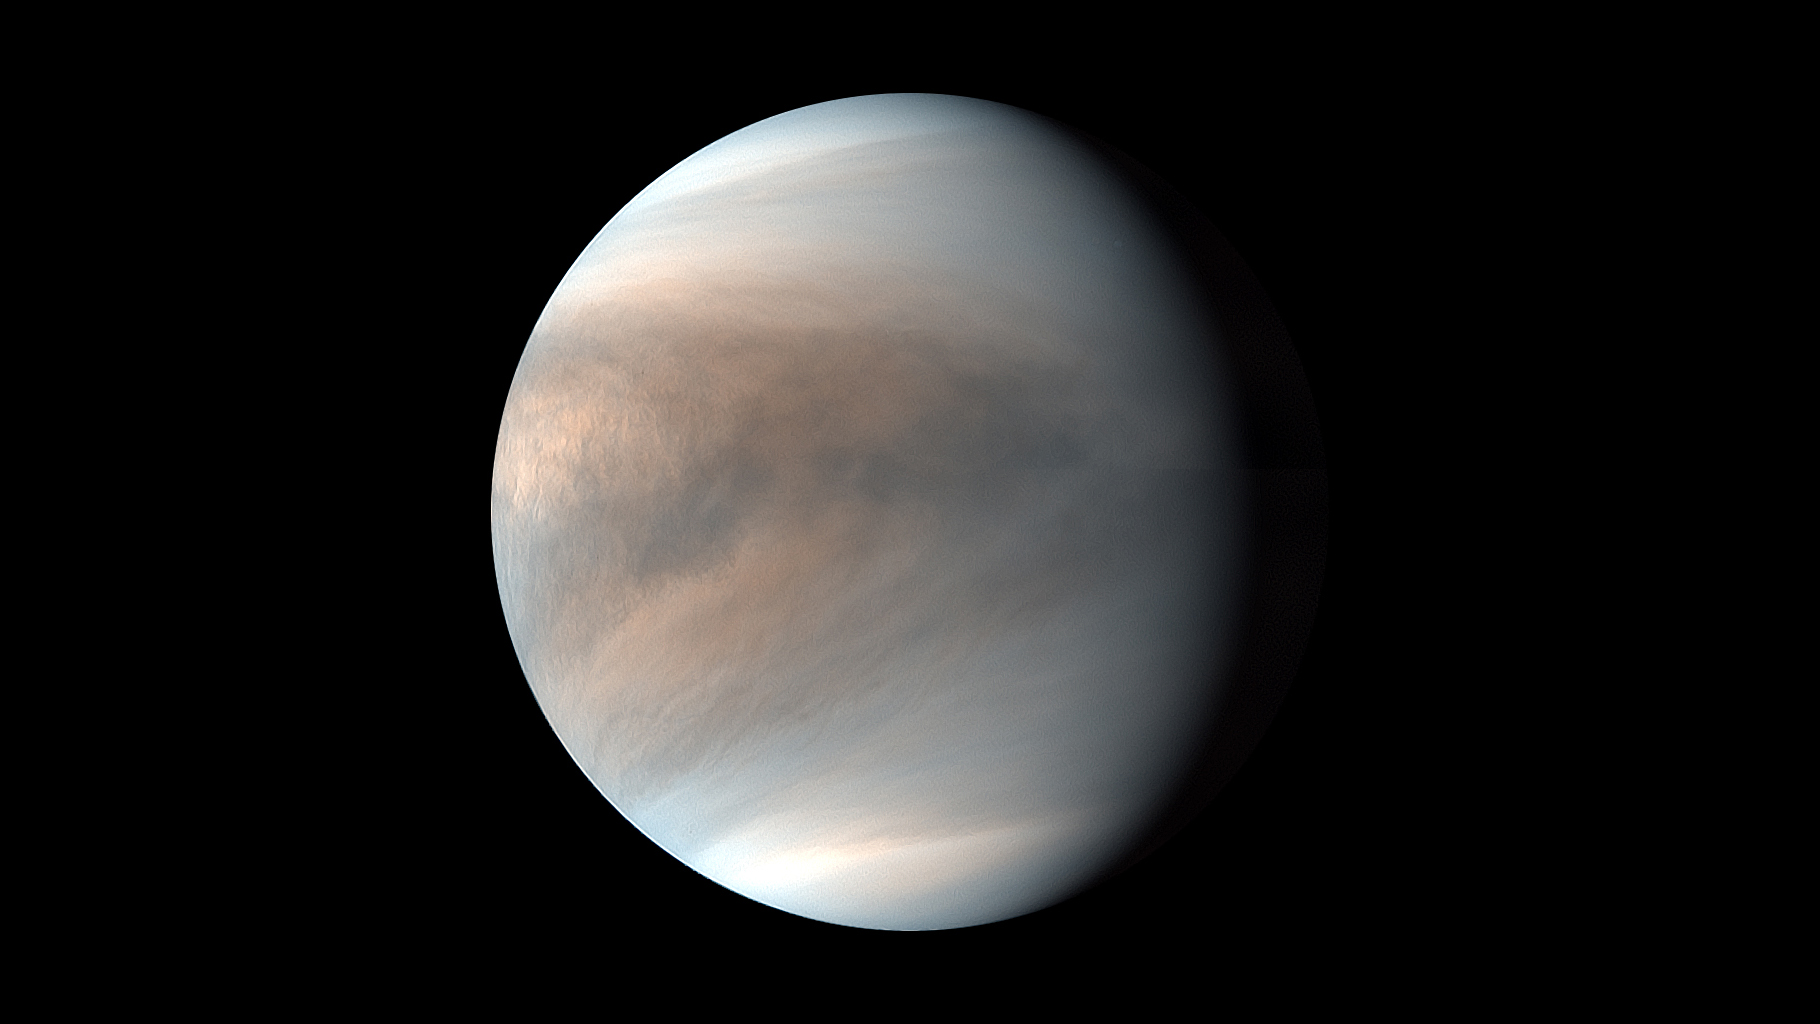 Existence on Venus? Breakthrough Initiatives funds look of that you just may perhaps perhaps well possibly possibly contemplate of biosignature detection